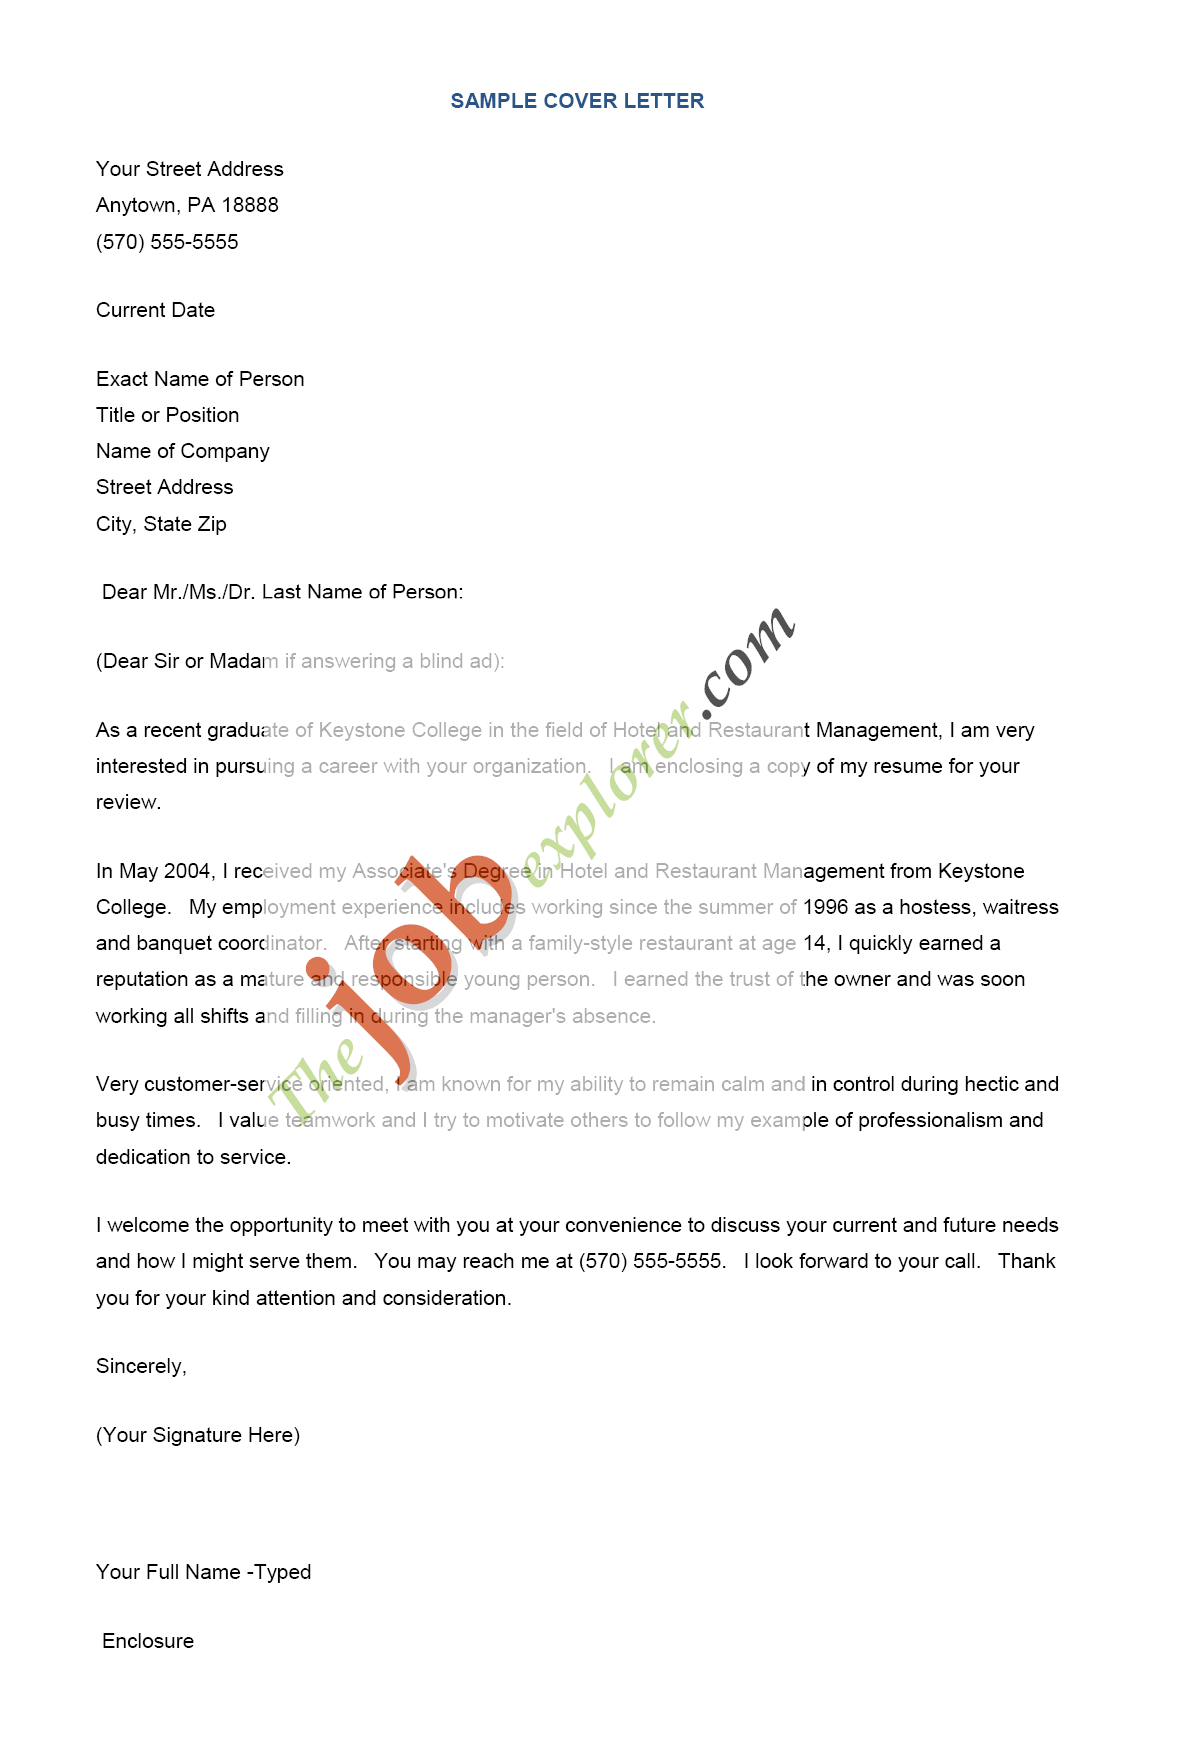 Cover letter sample ideal candidate